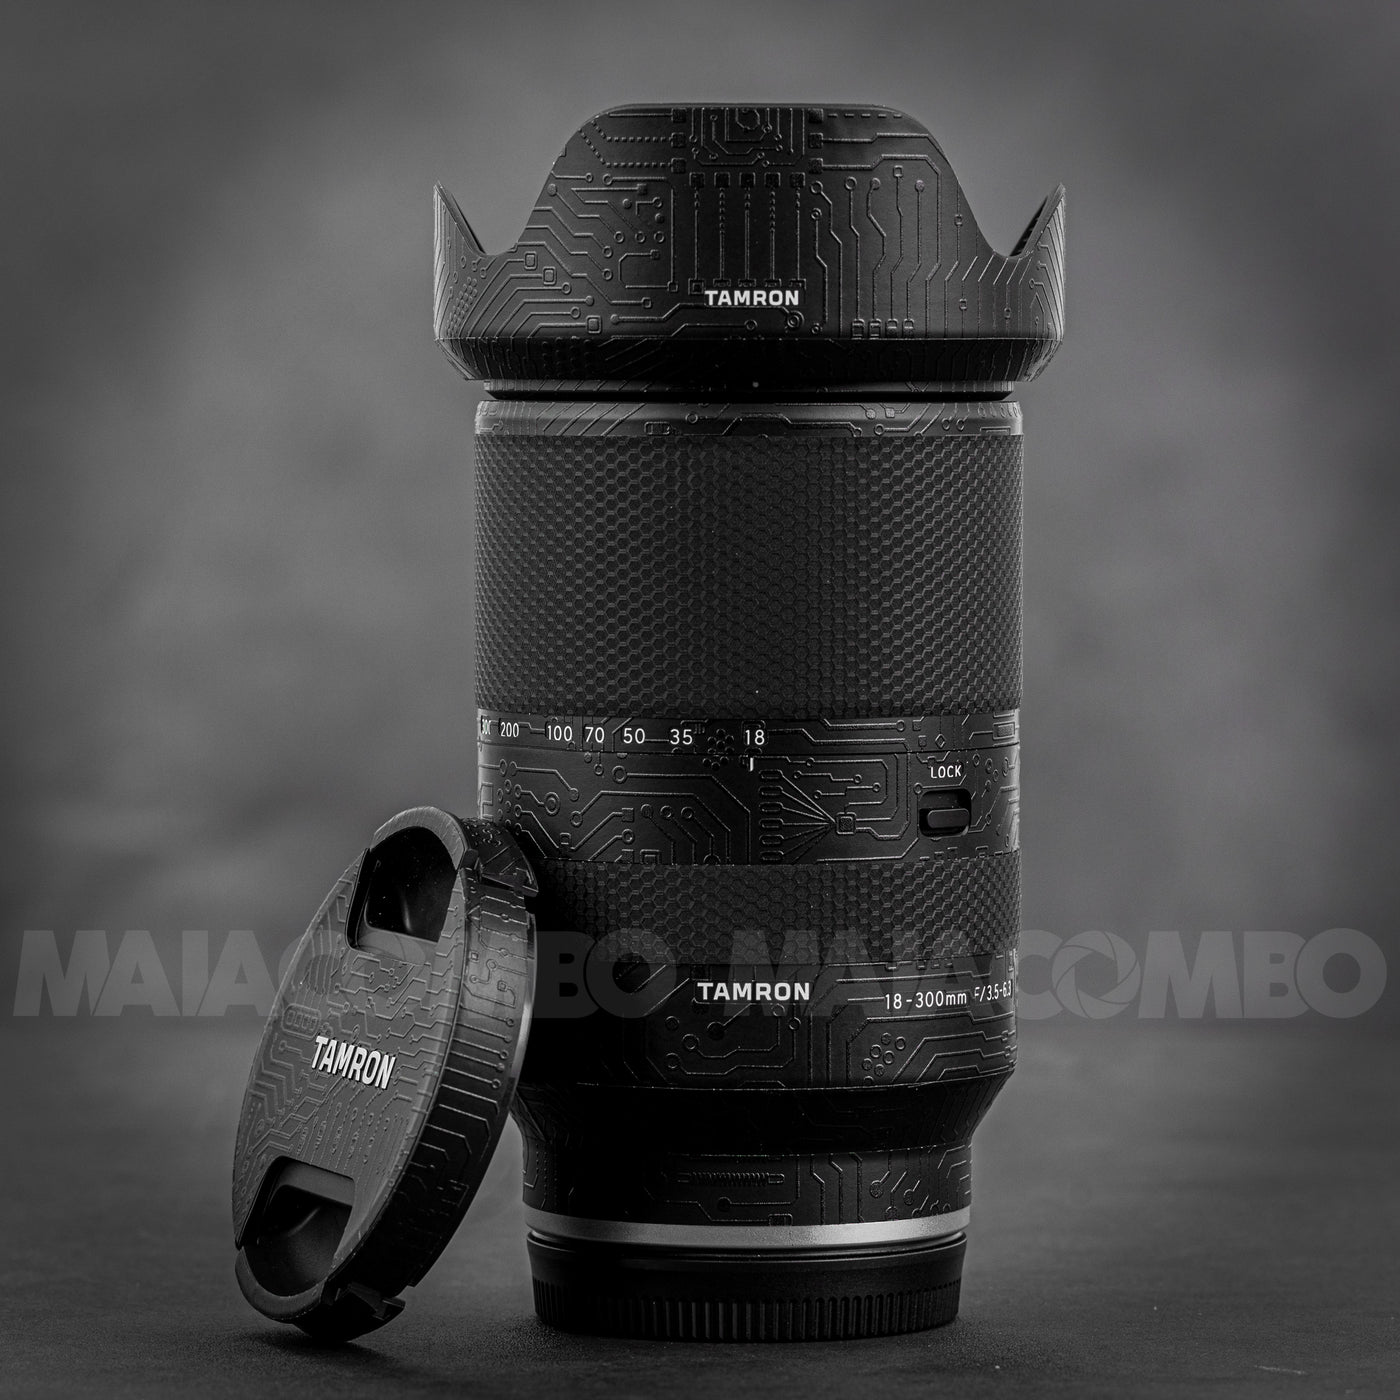 Tamron 18-300mm f/3.5-6.3 Di III-A VC VXD Lens Skin/ Wrap For SONY